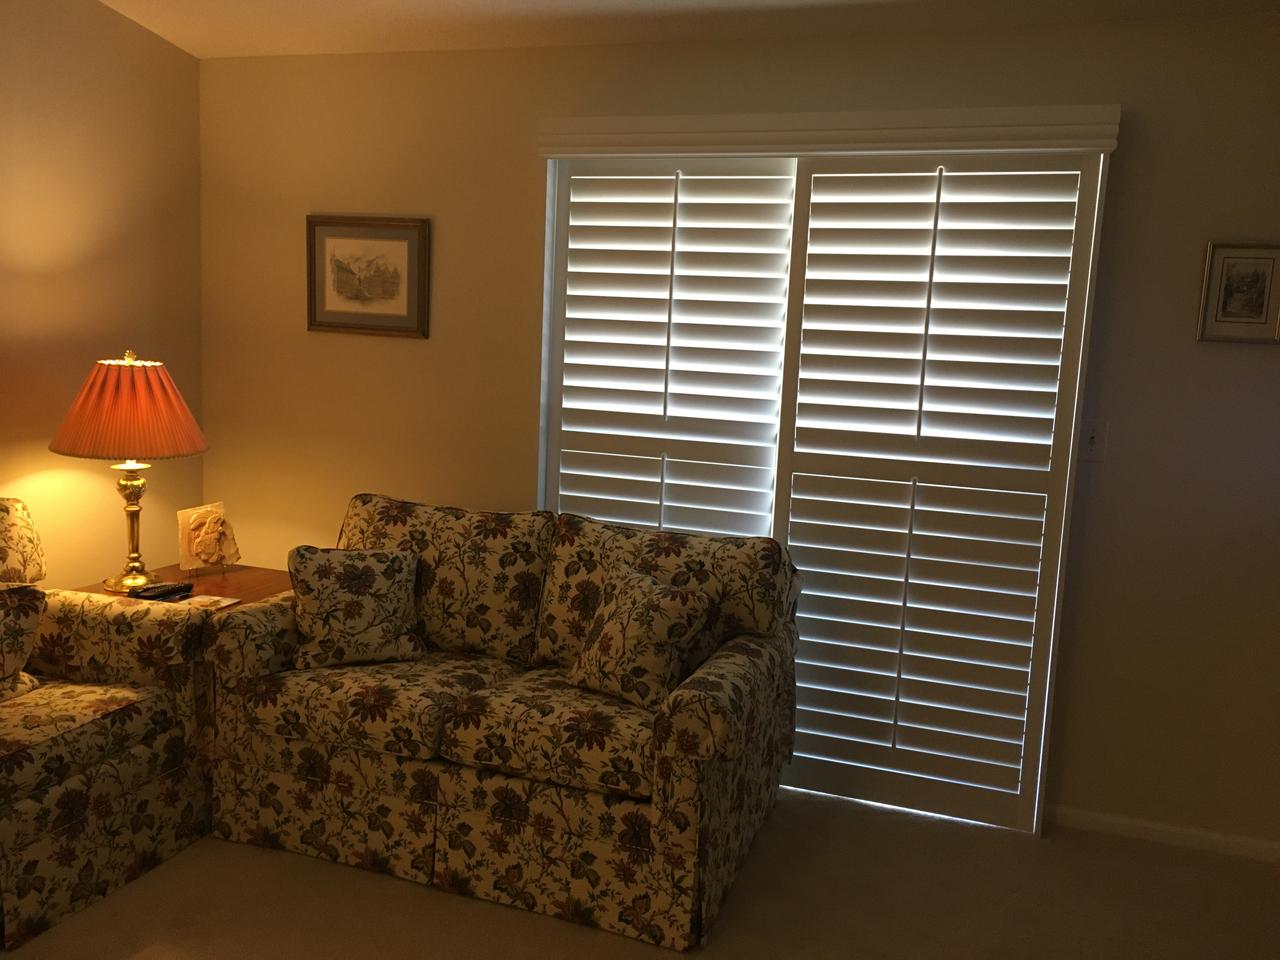 Sliding glass doors in living room with bypass shutters